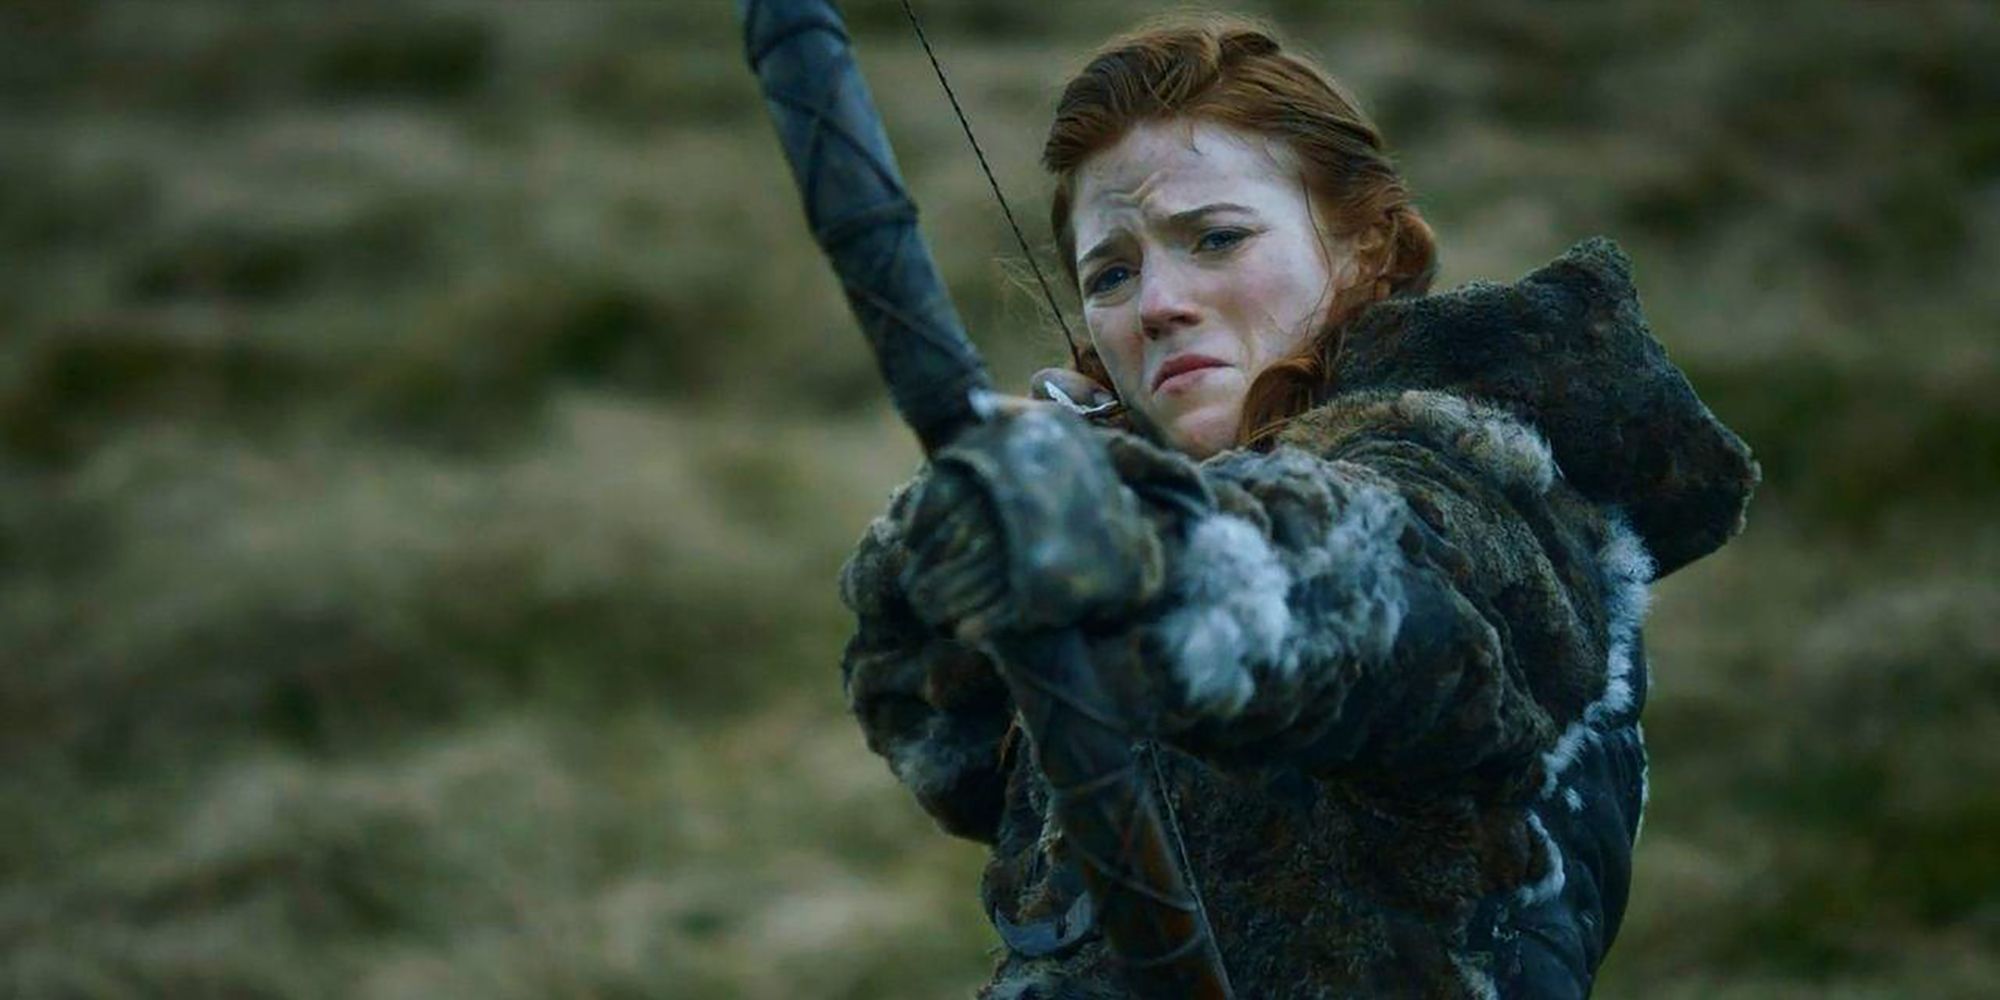 Ygritte aims at Jon Snow in Game of Thrones.